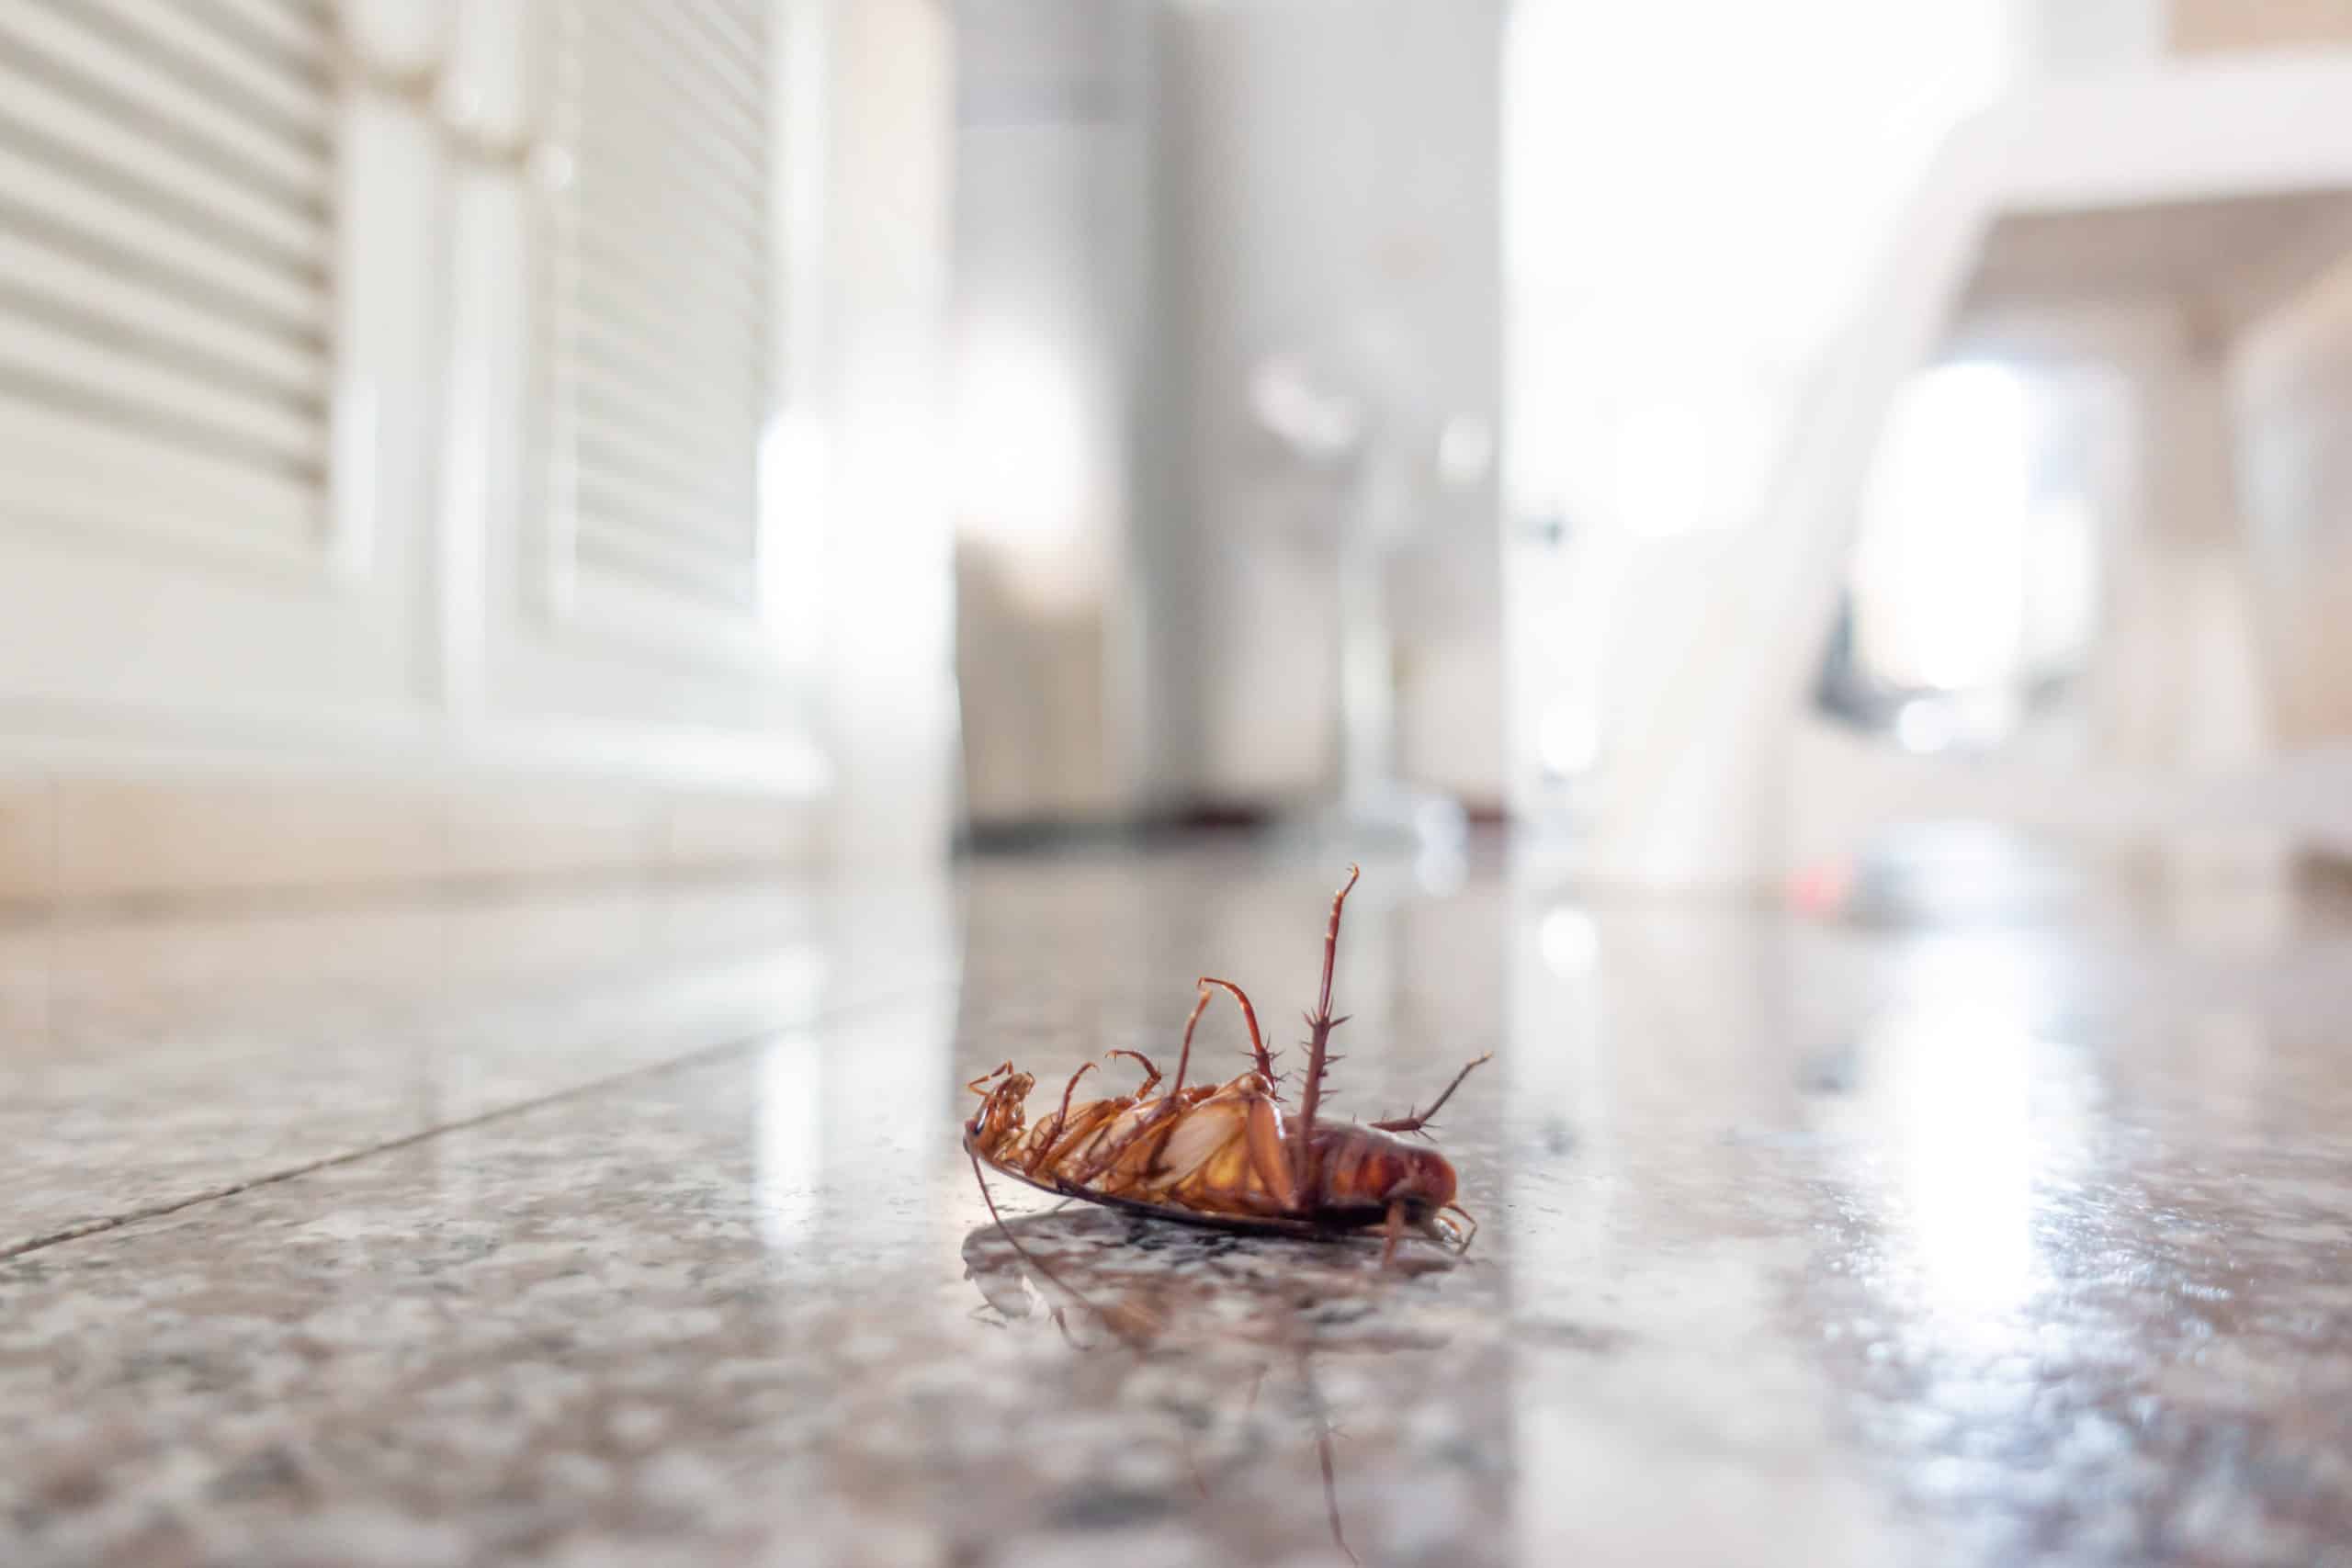 Can Cockroach Eggs Stick to Your Shoes?